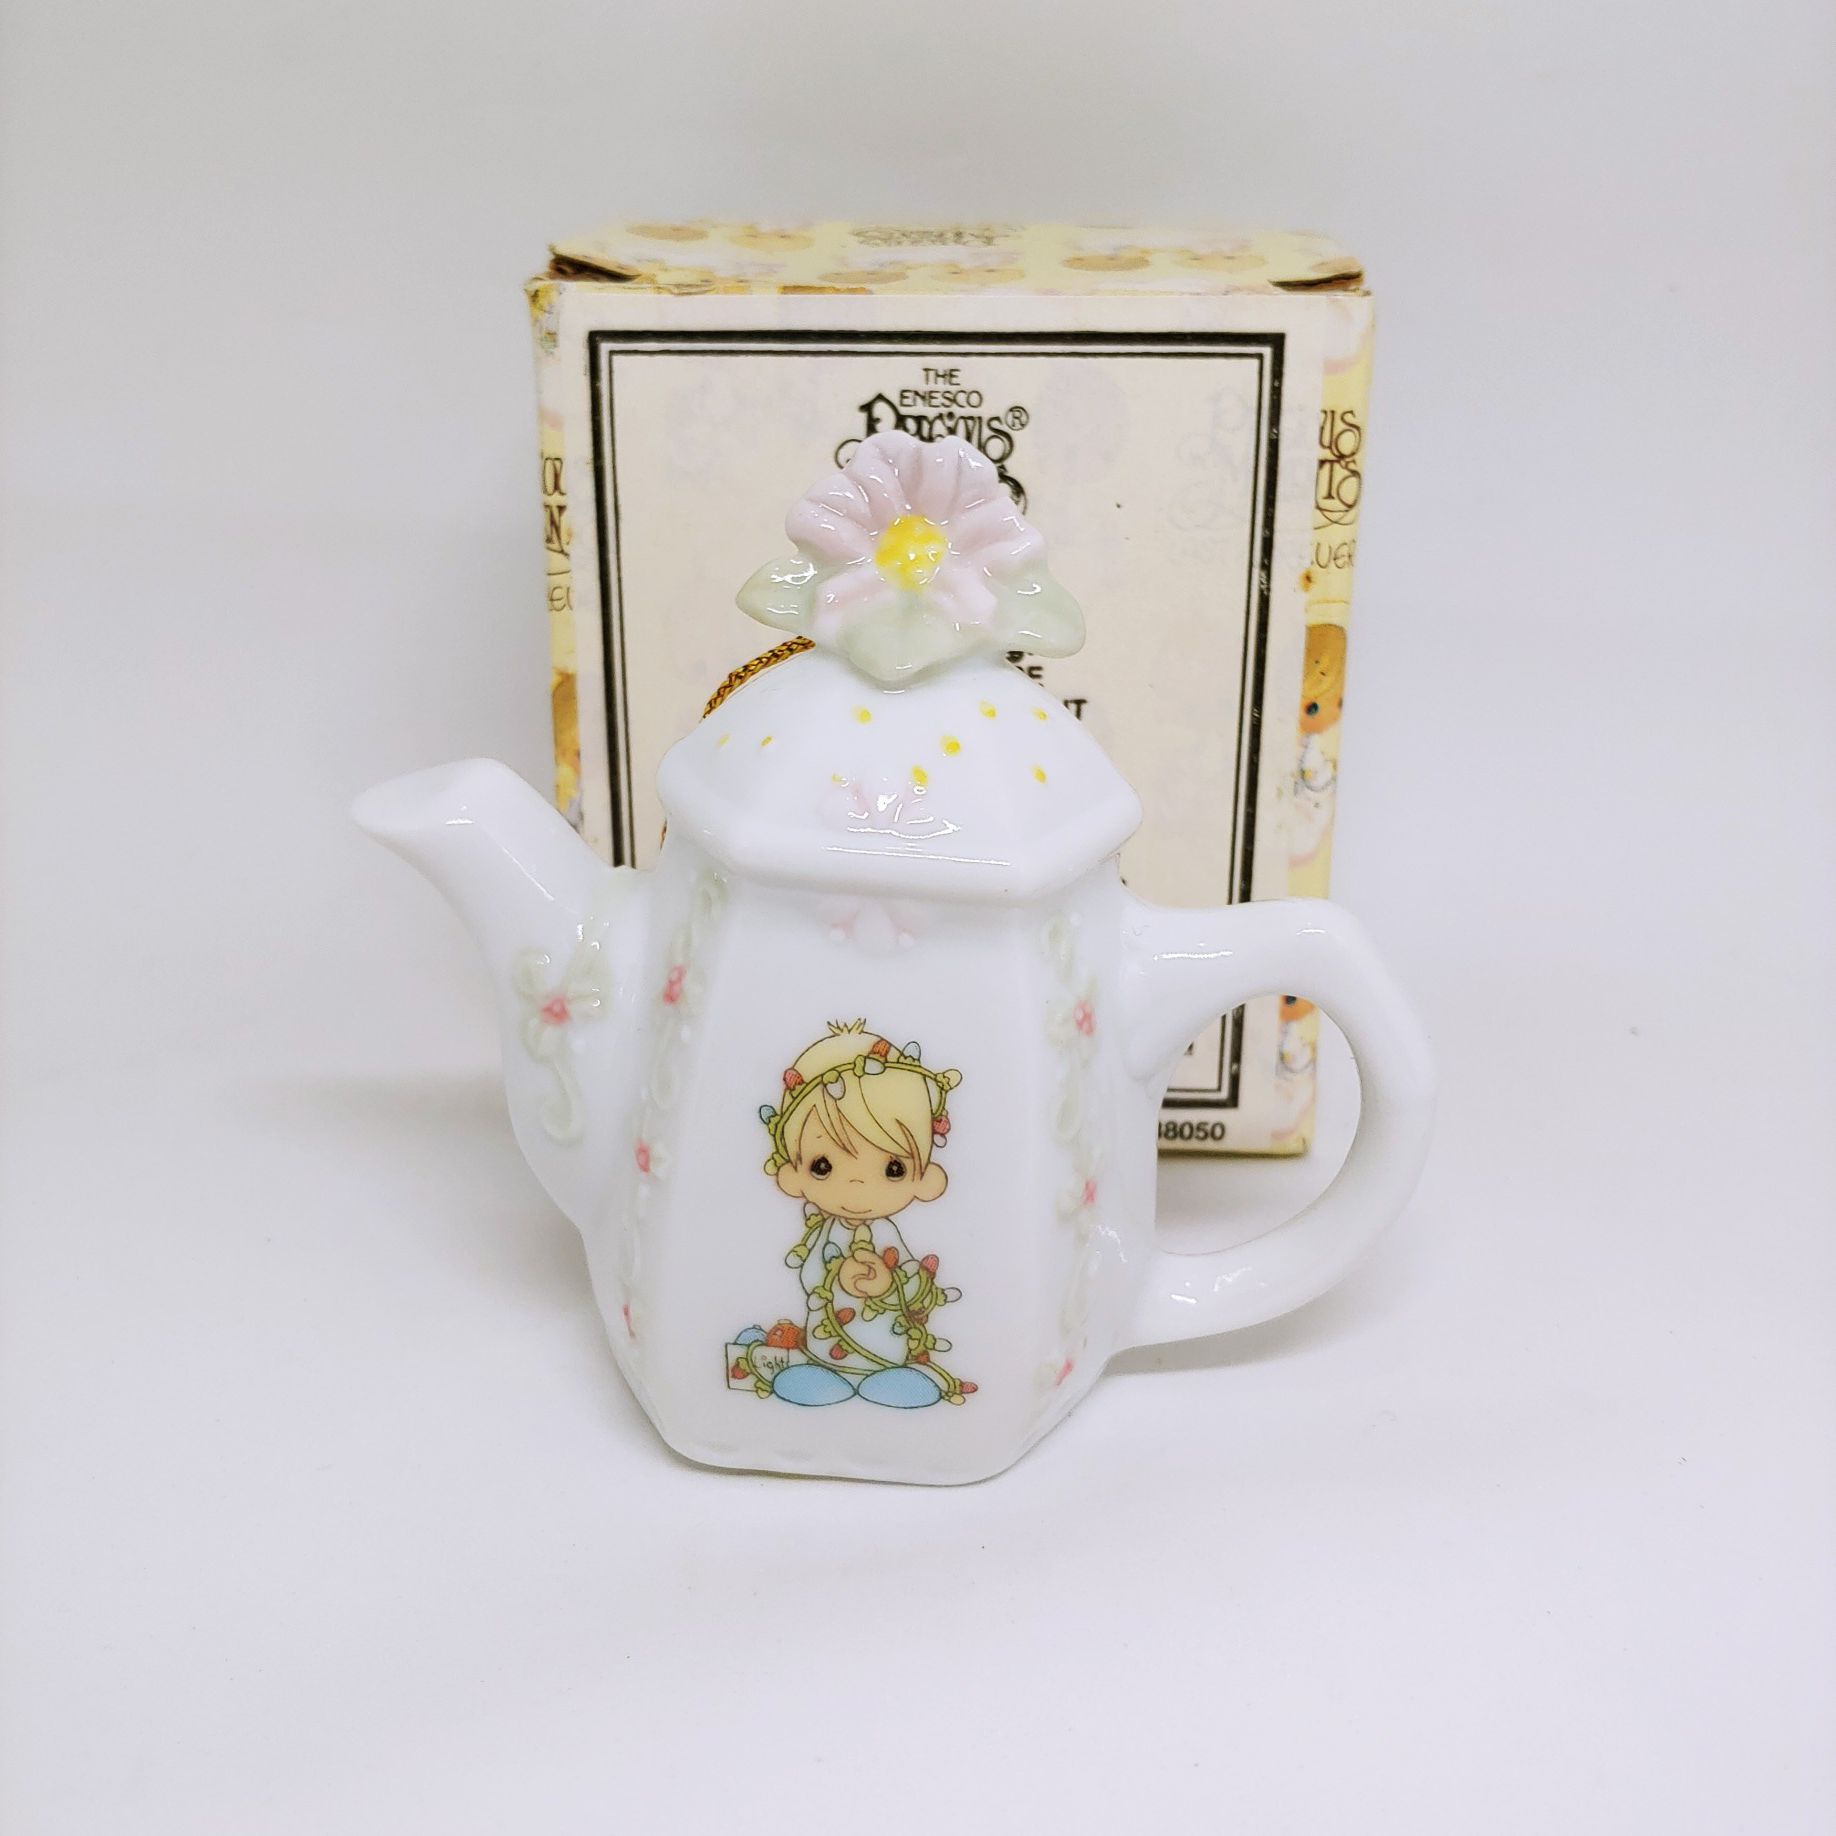 Vintage 1994 PRECIOUS MOMENTS Boy With Lights TEAPOT SHAPED HANGING ORNAMENT 340324L